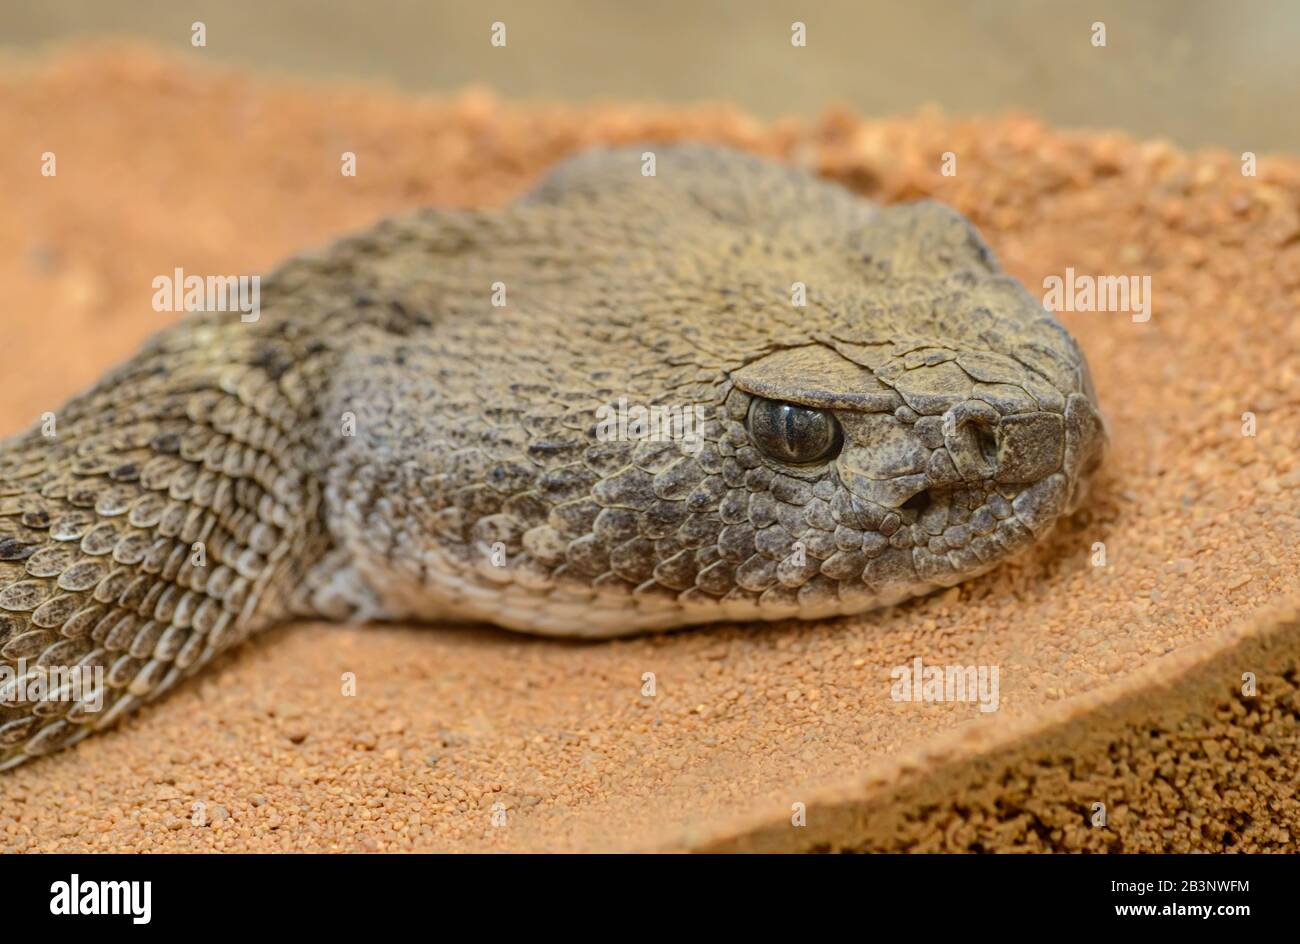 detailed portrait of a rattle snake in zoo Stock Photo